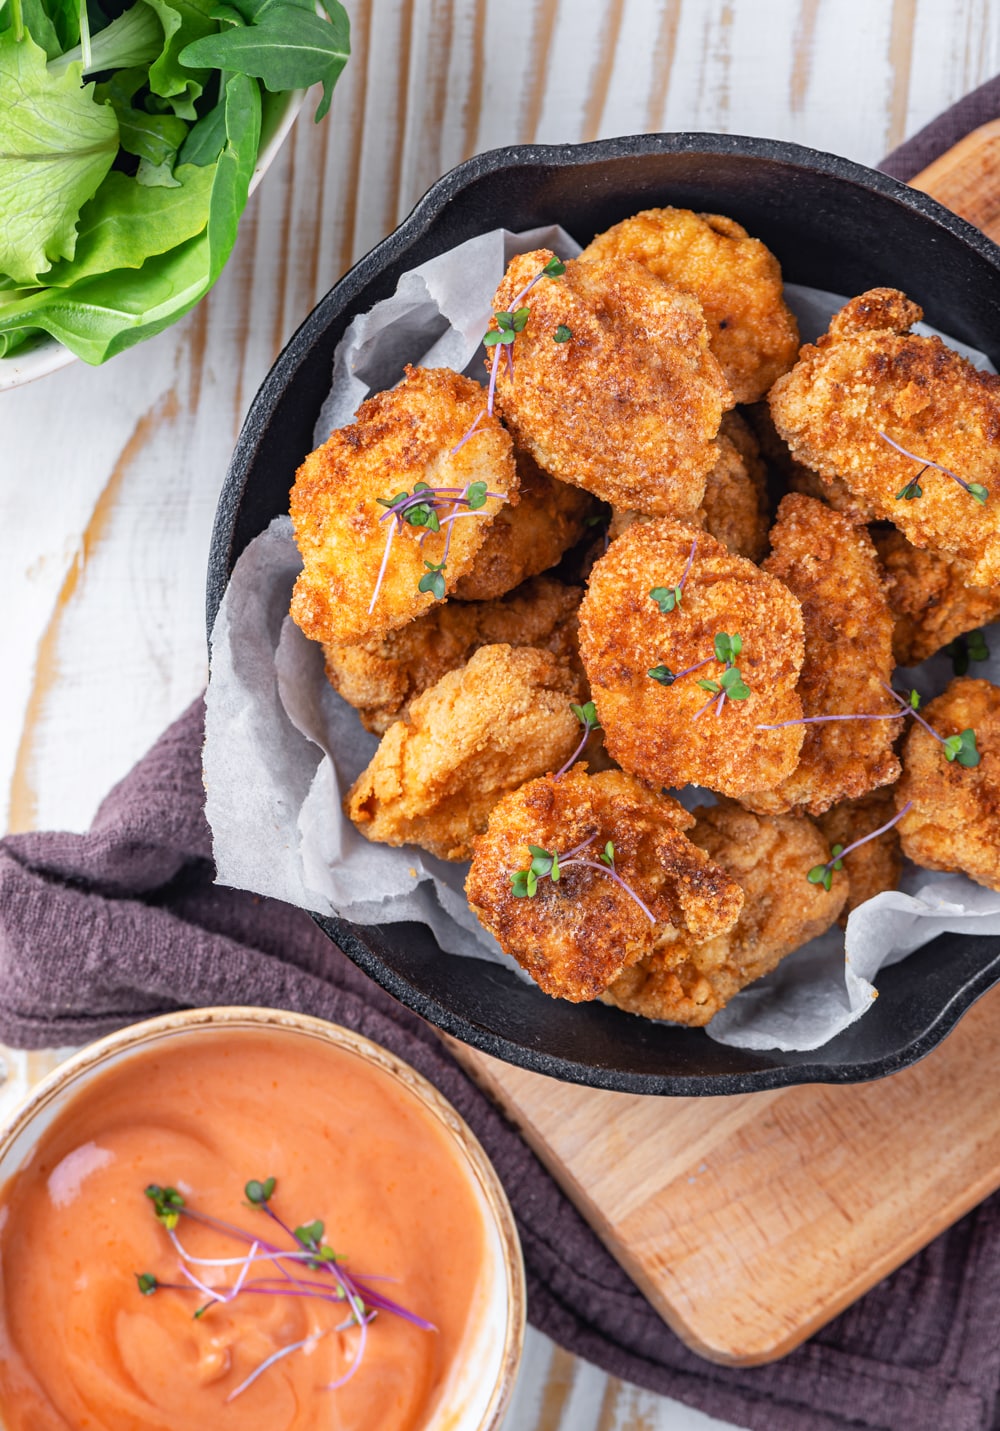 An overhead view of keto chicken nuggets on top of parchment paper in a skillet on a wood cutting board. In front of the cutting board is dipping sauce in a bowl and everything is on a wooden table.